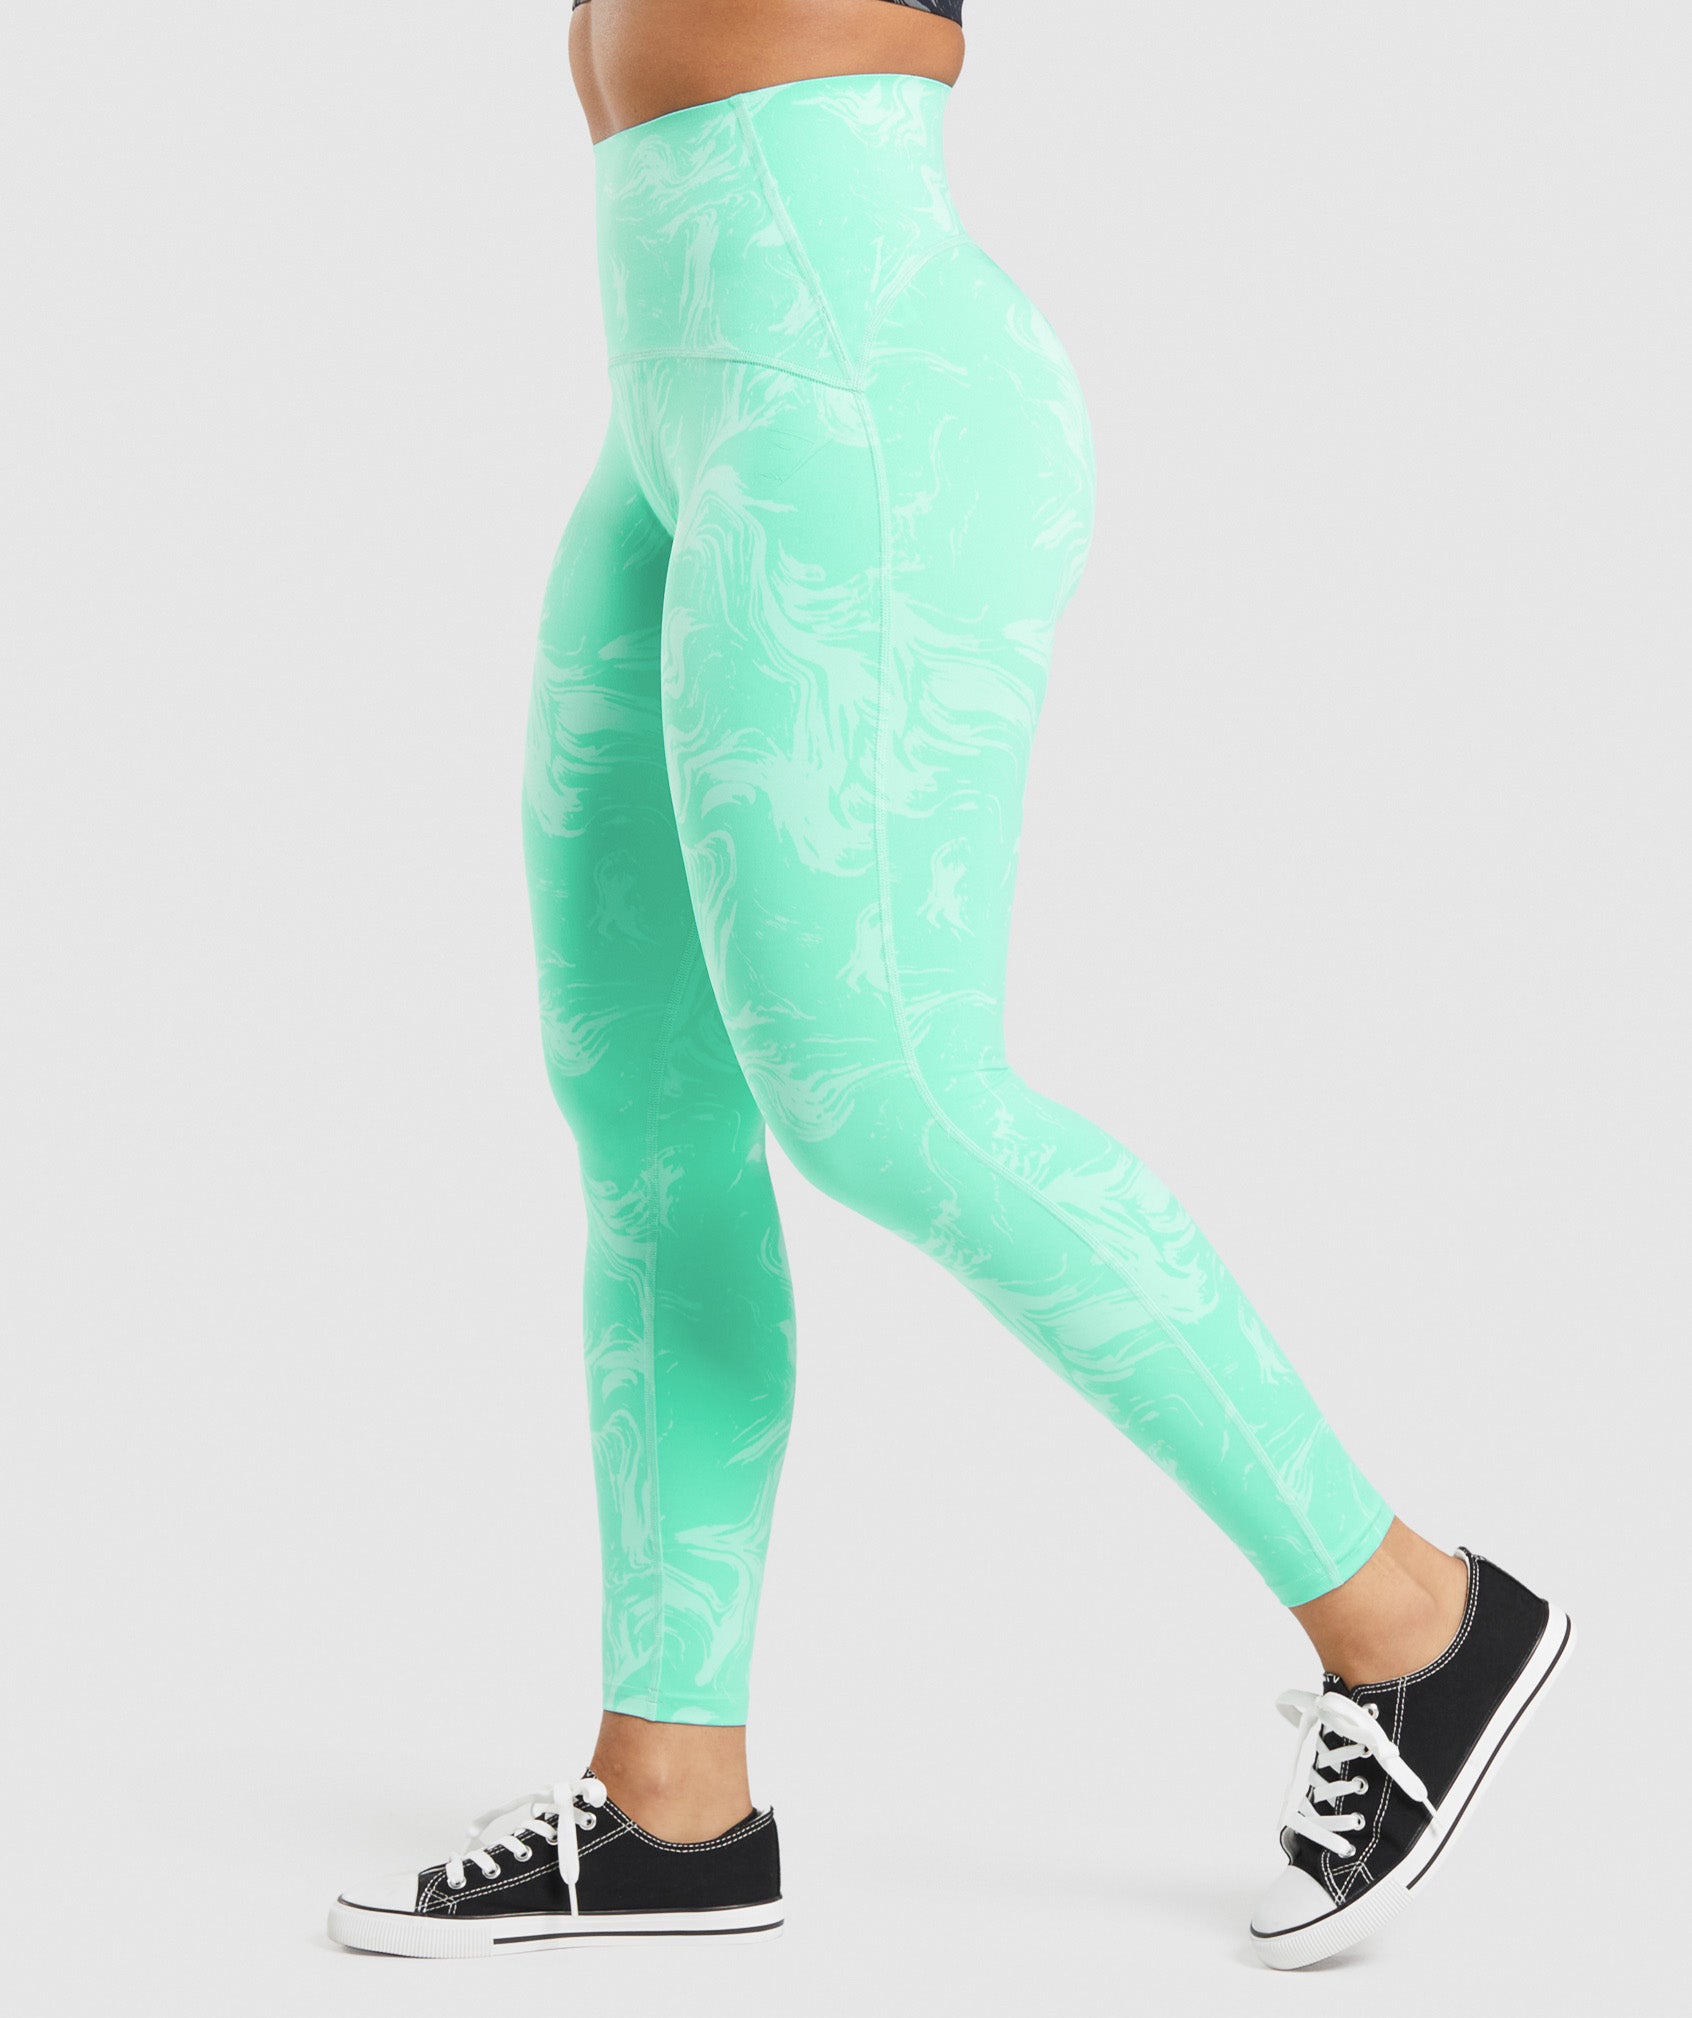 Waist Support Leggings in Bright Turquoise Print - view 3